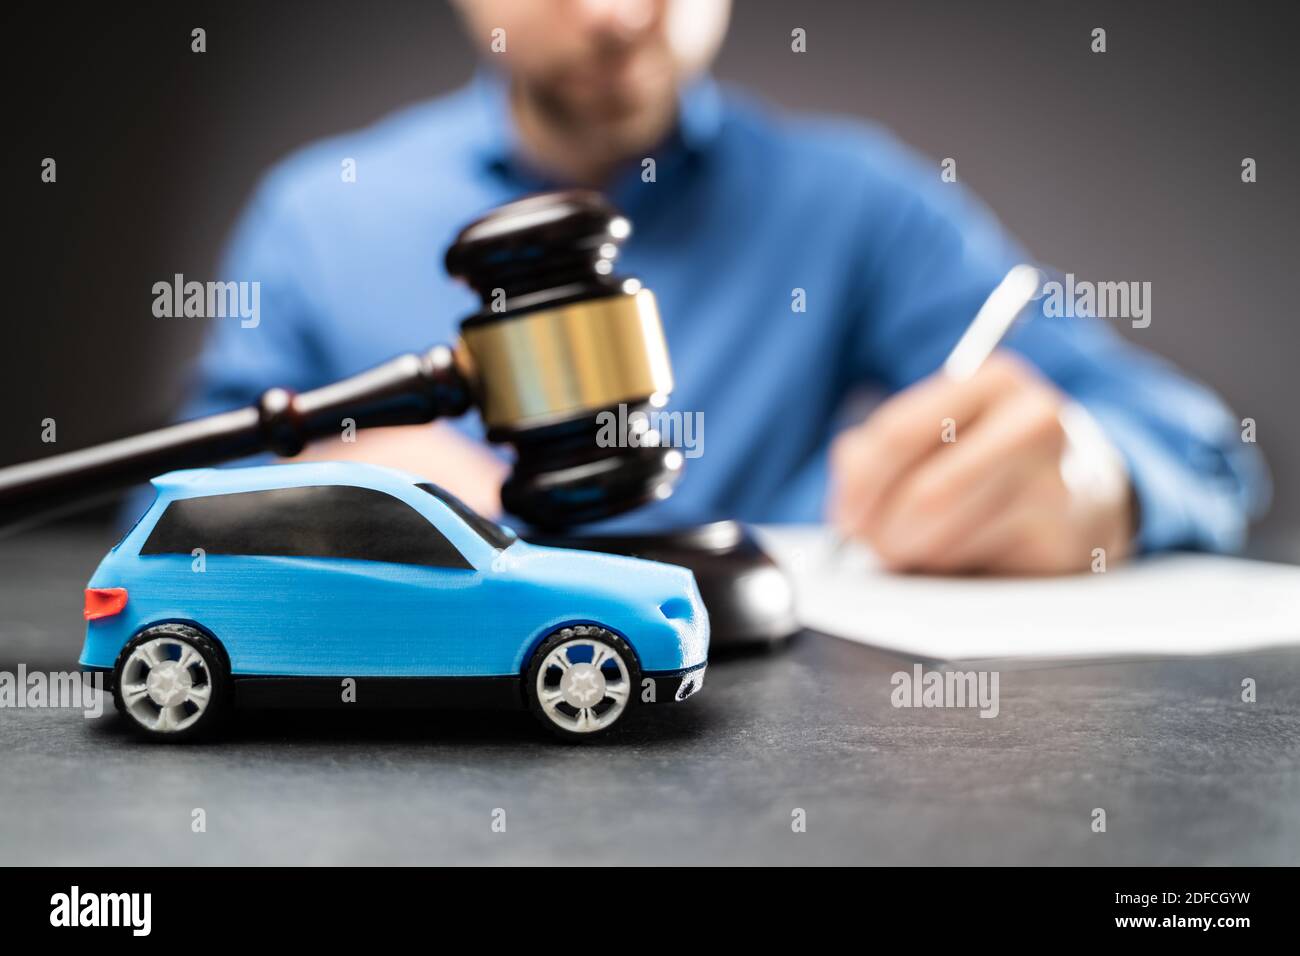 Car Lawyer Or Judge Verdict With Gavel In Courtroom Stock Photo